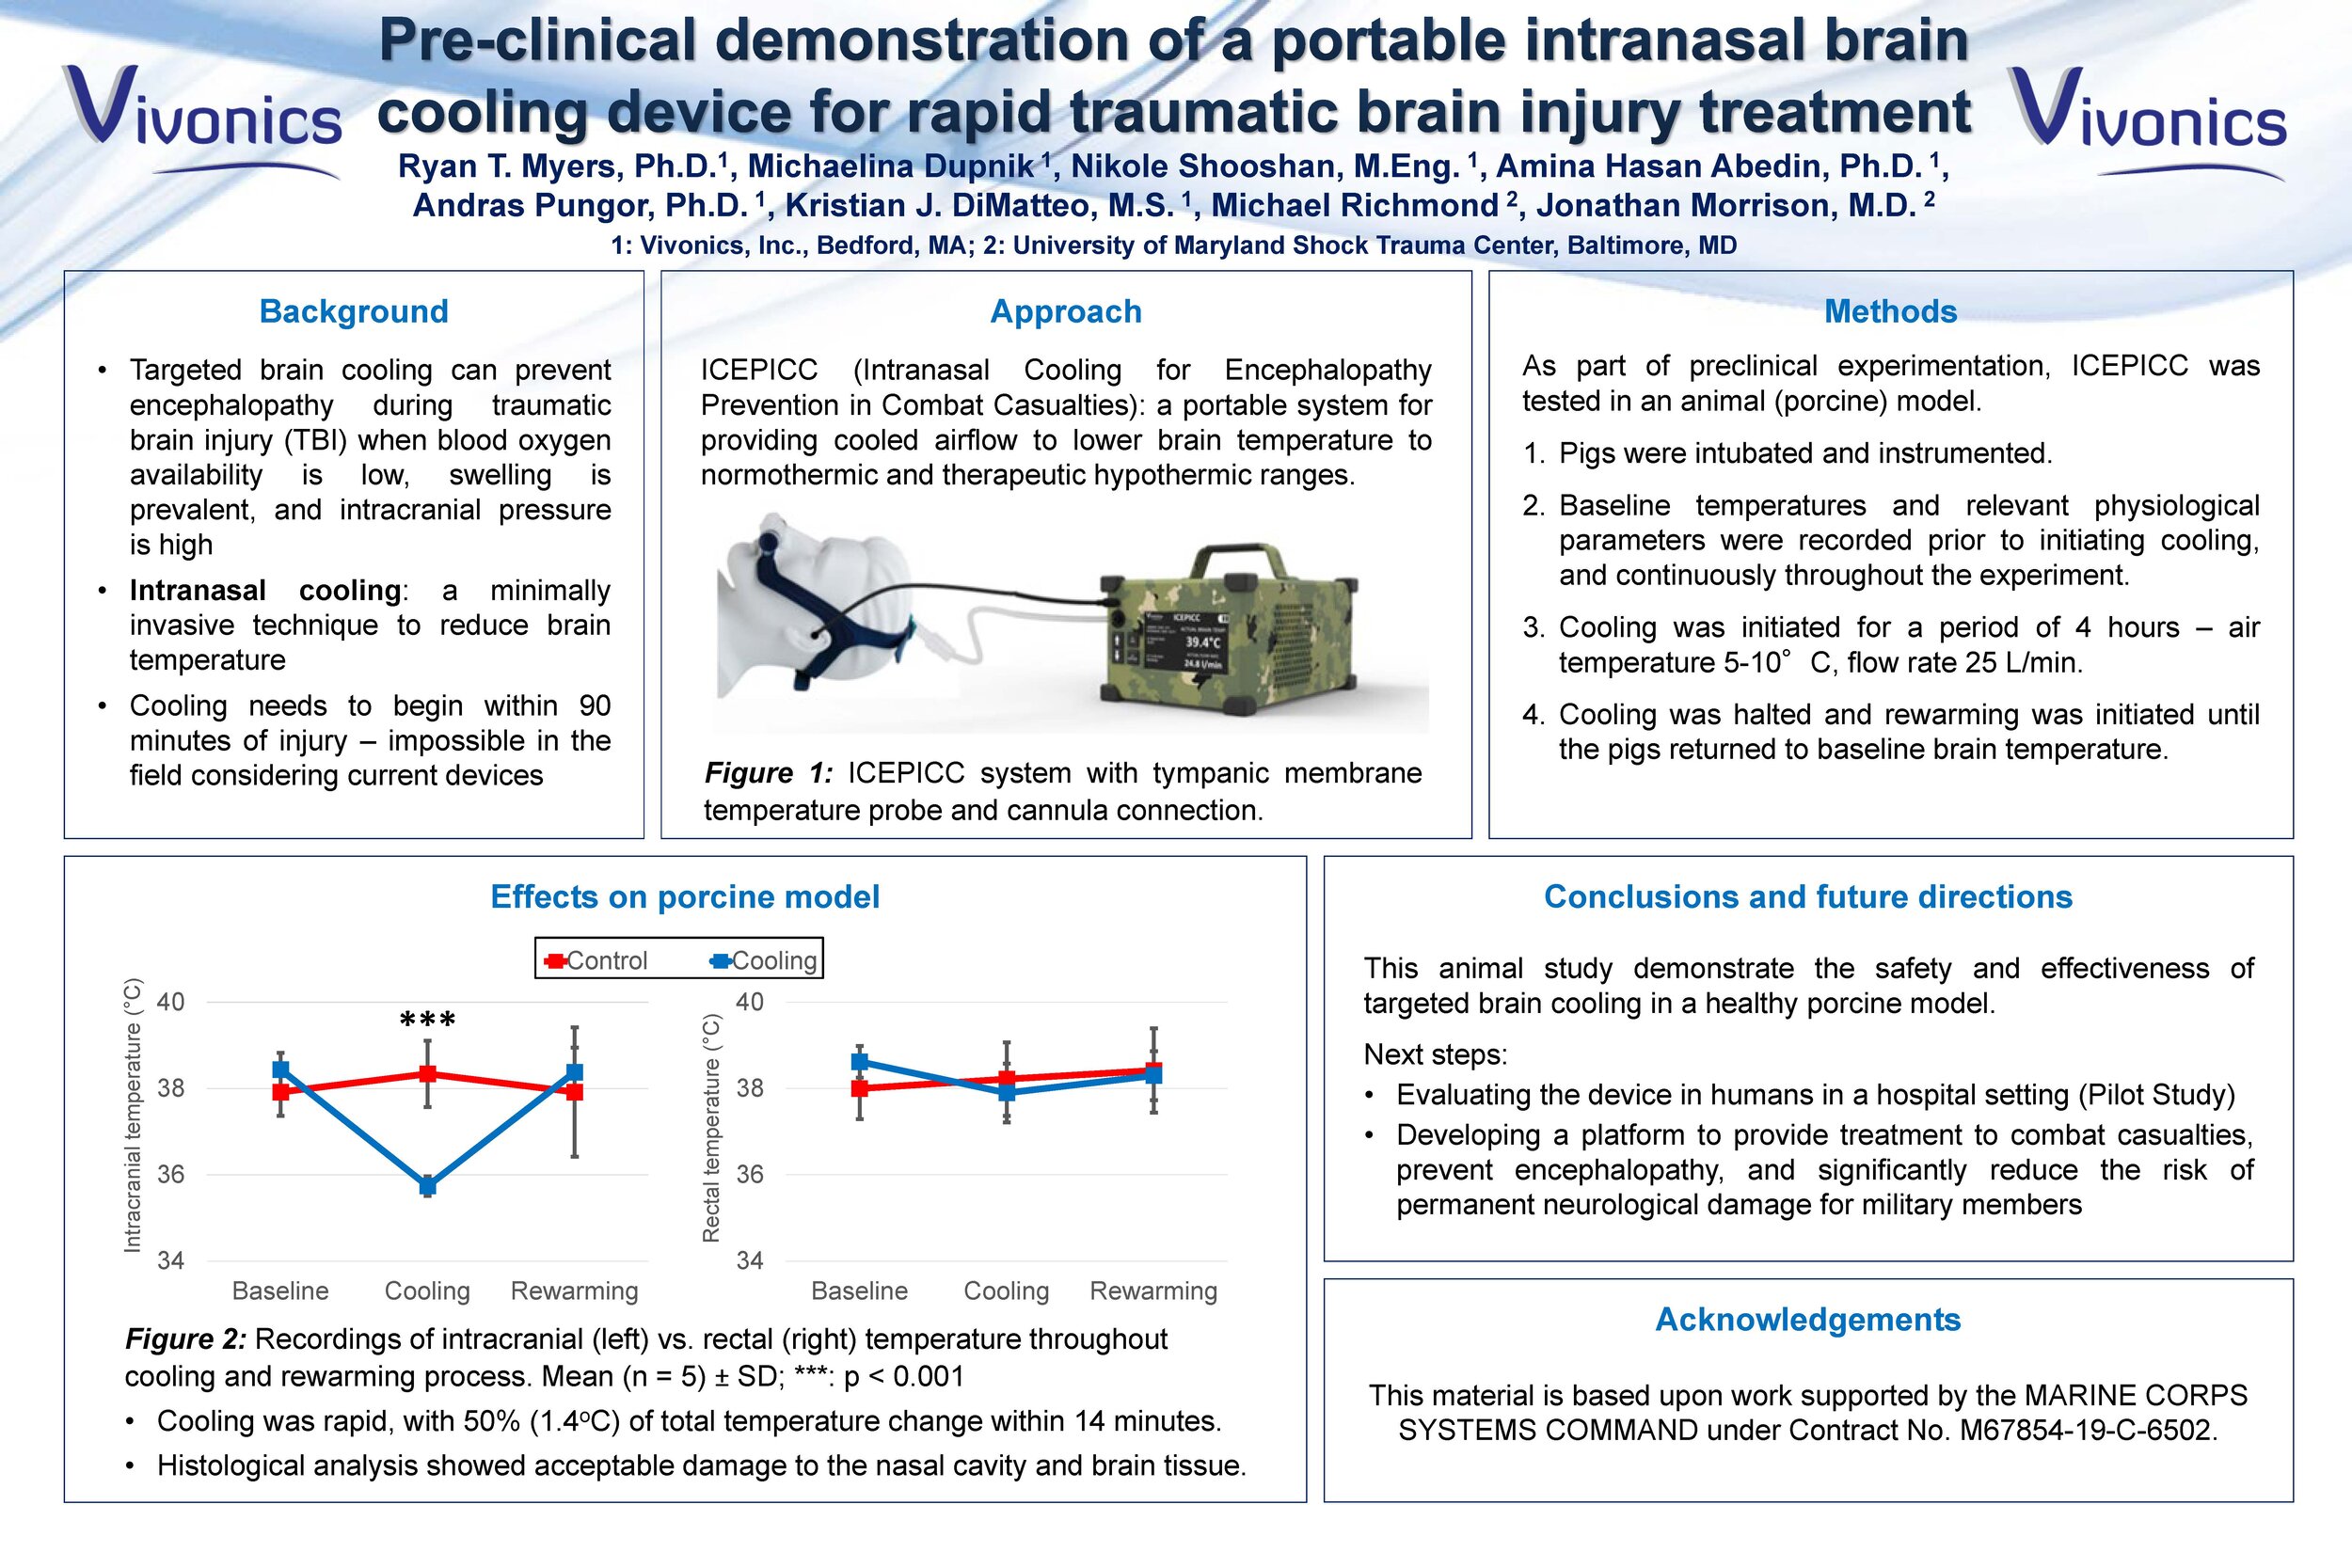 Pre-clinical demonstration of a portable intranasal brain cooling device for rapid traumatic brain injury treatment